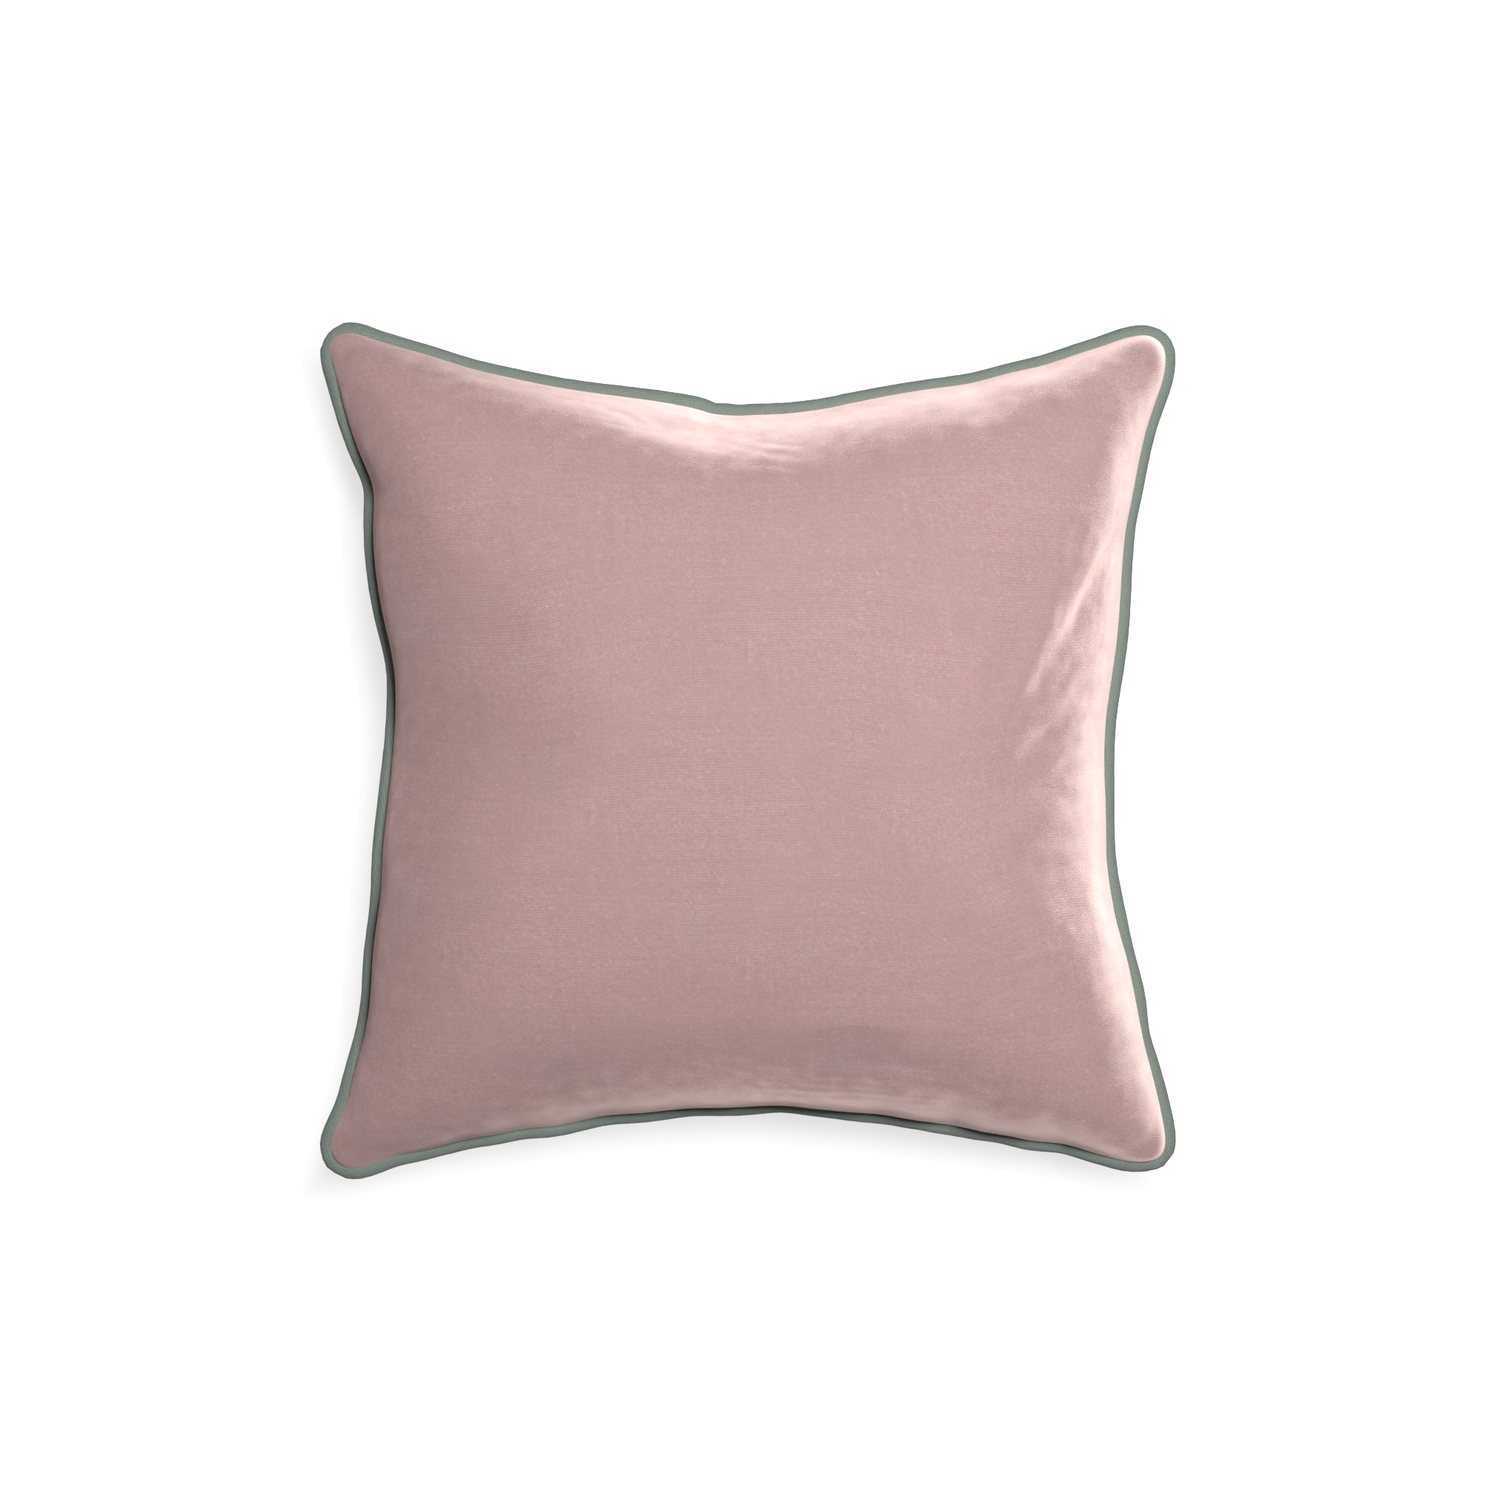 18-square mauve velvet custom mauvepillow with sage piping on white background